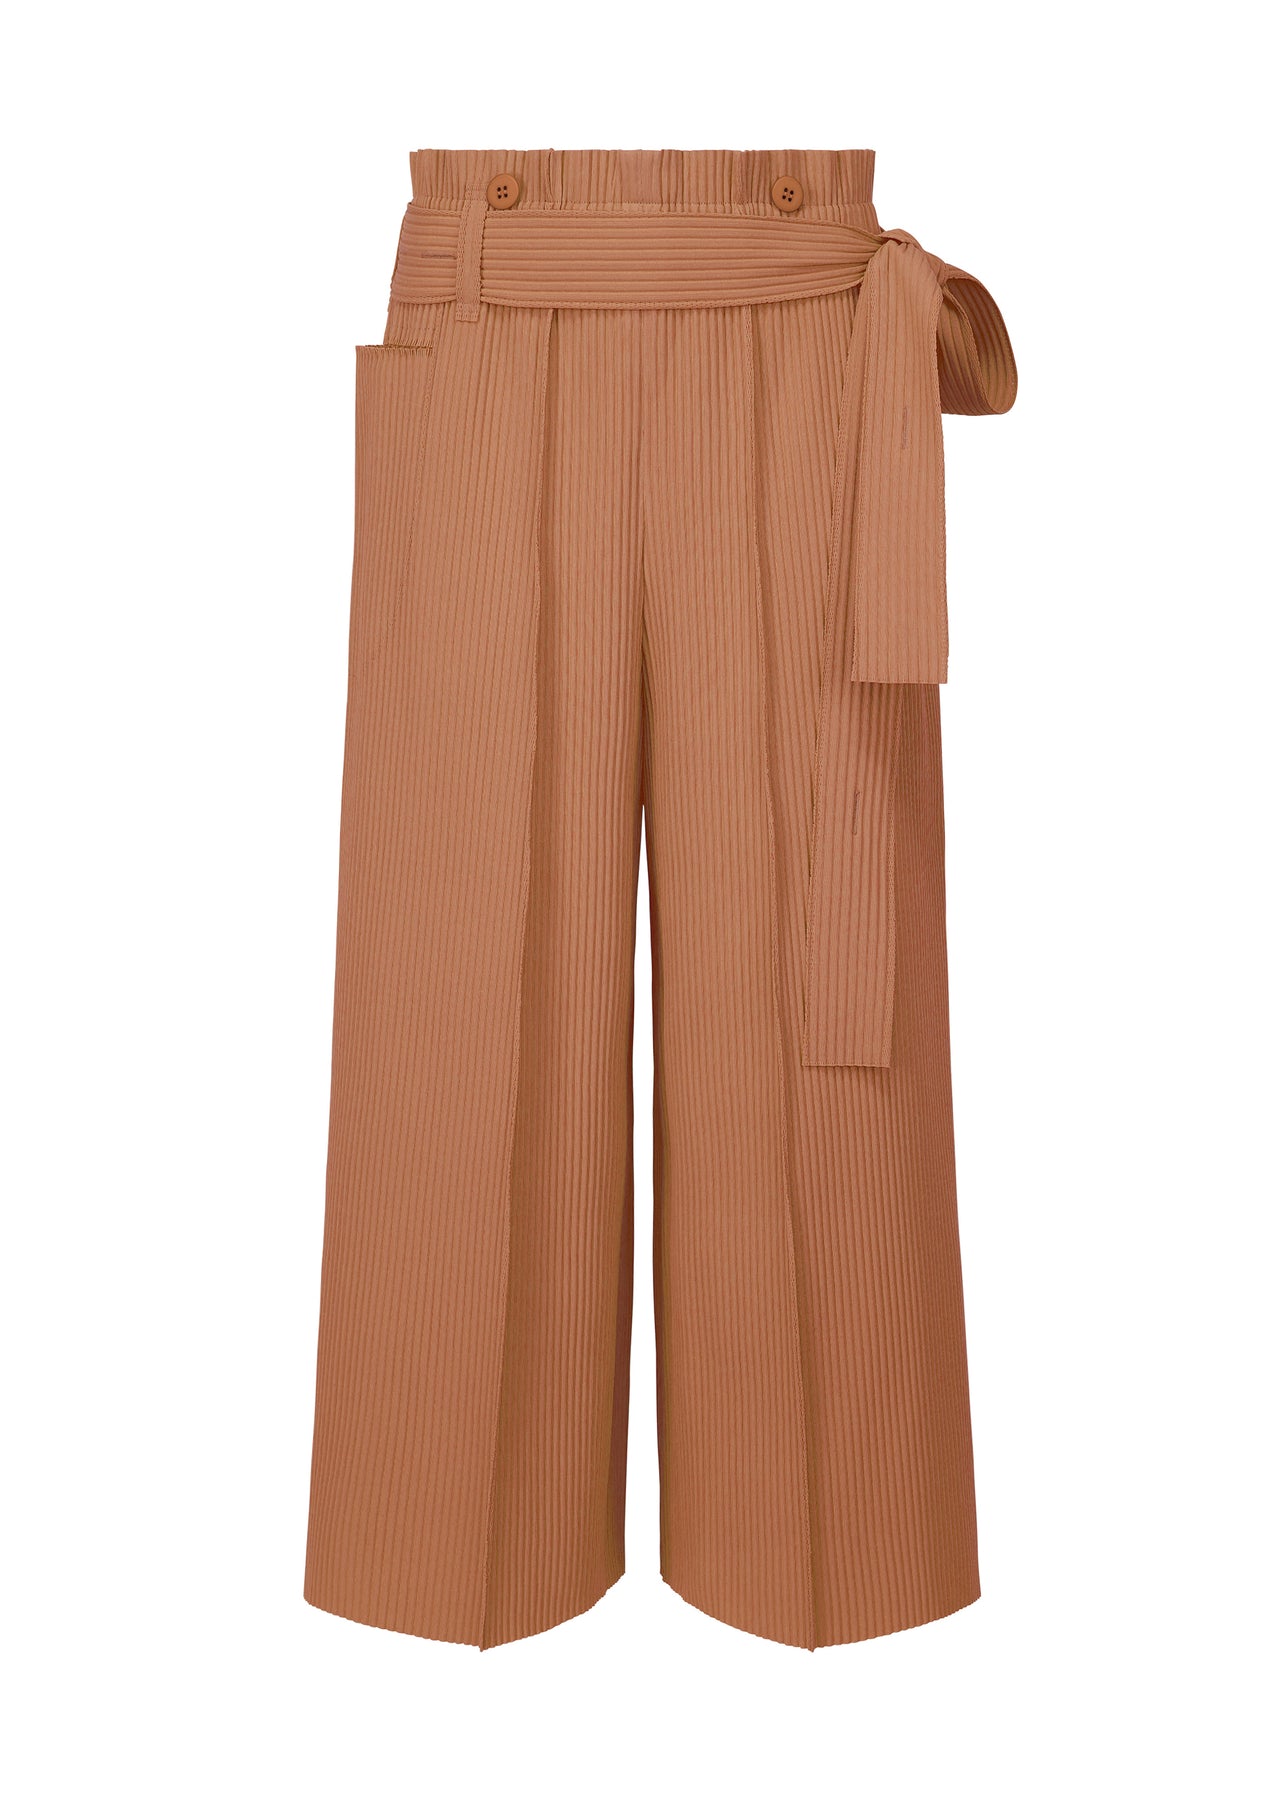 FINE KNIT PLEATS BOTTOMS 1 | The official ISSEY MIYAKE ONLINE ...